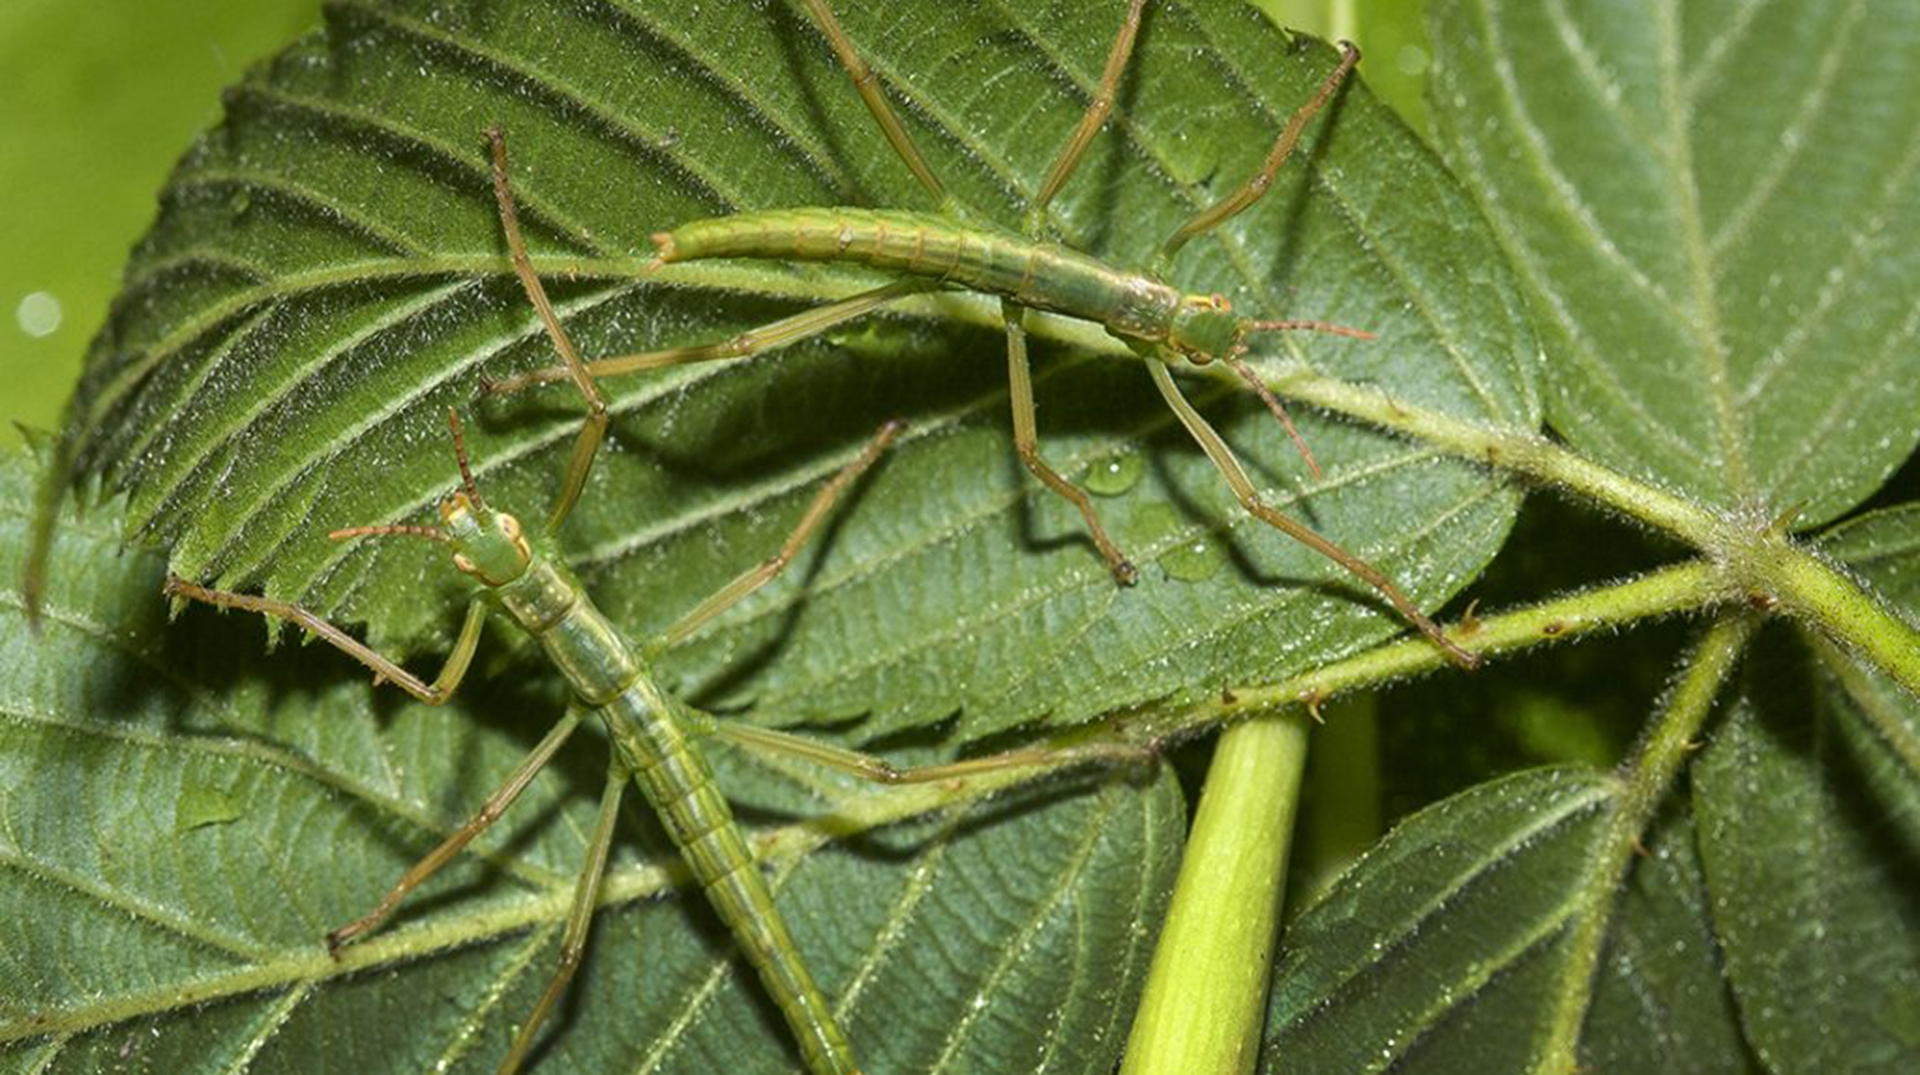 0145 stick insect one of worlds strangest animals 2